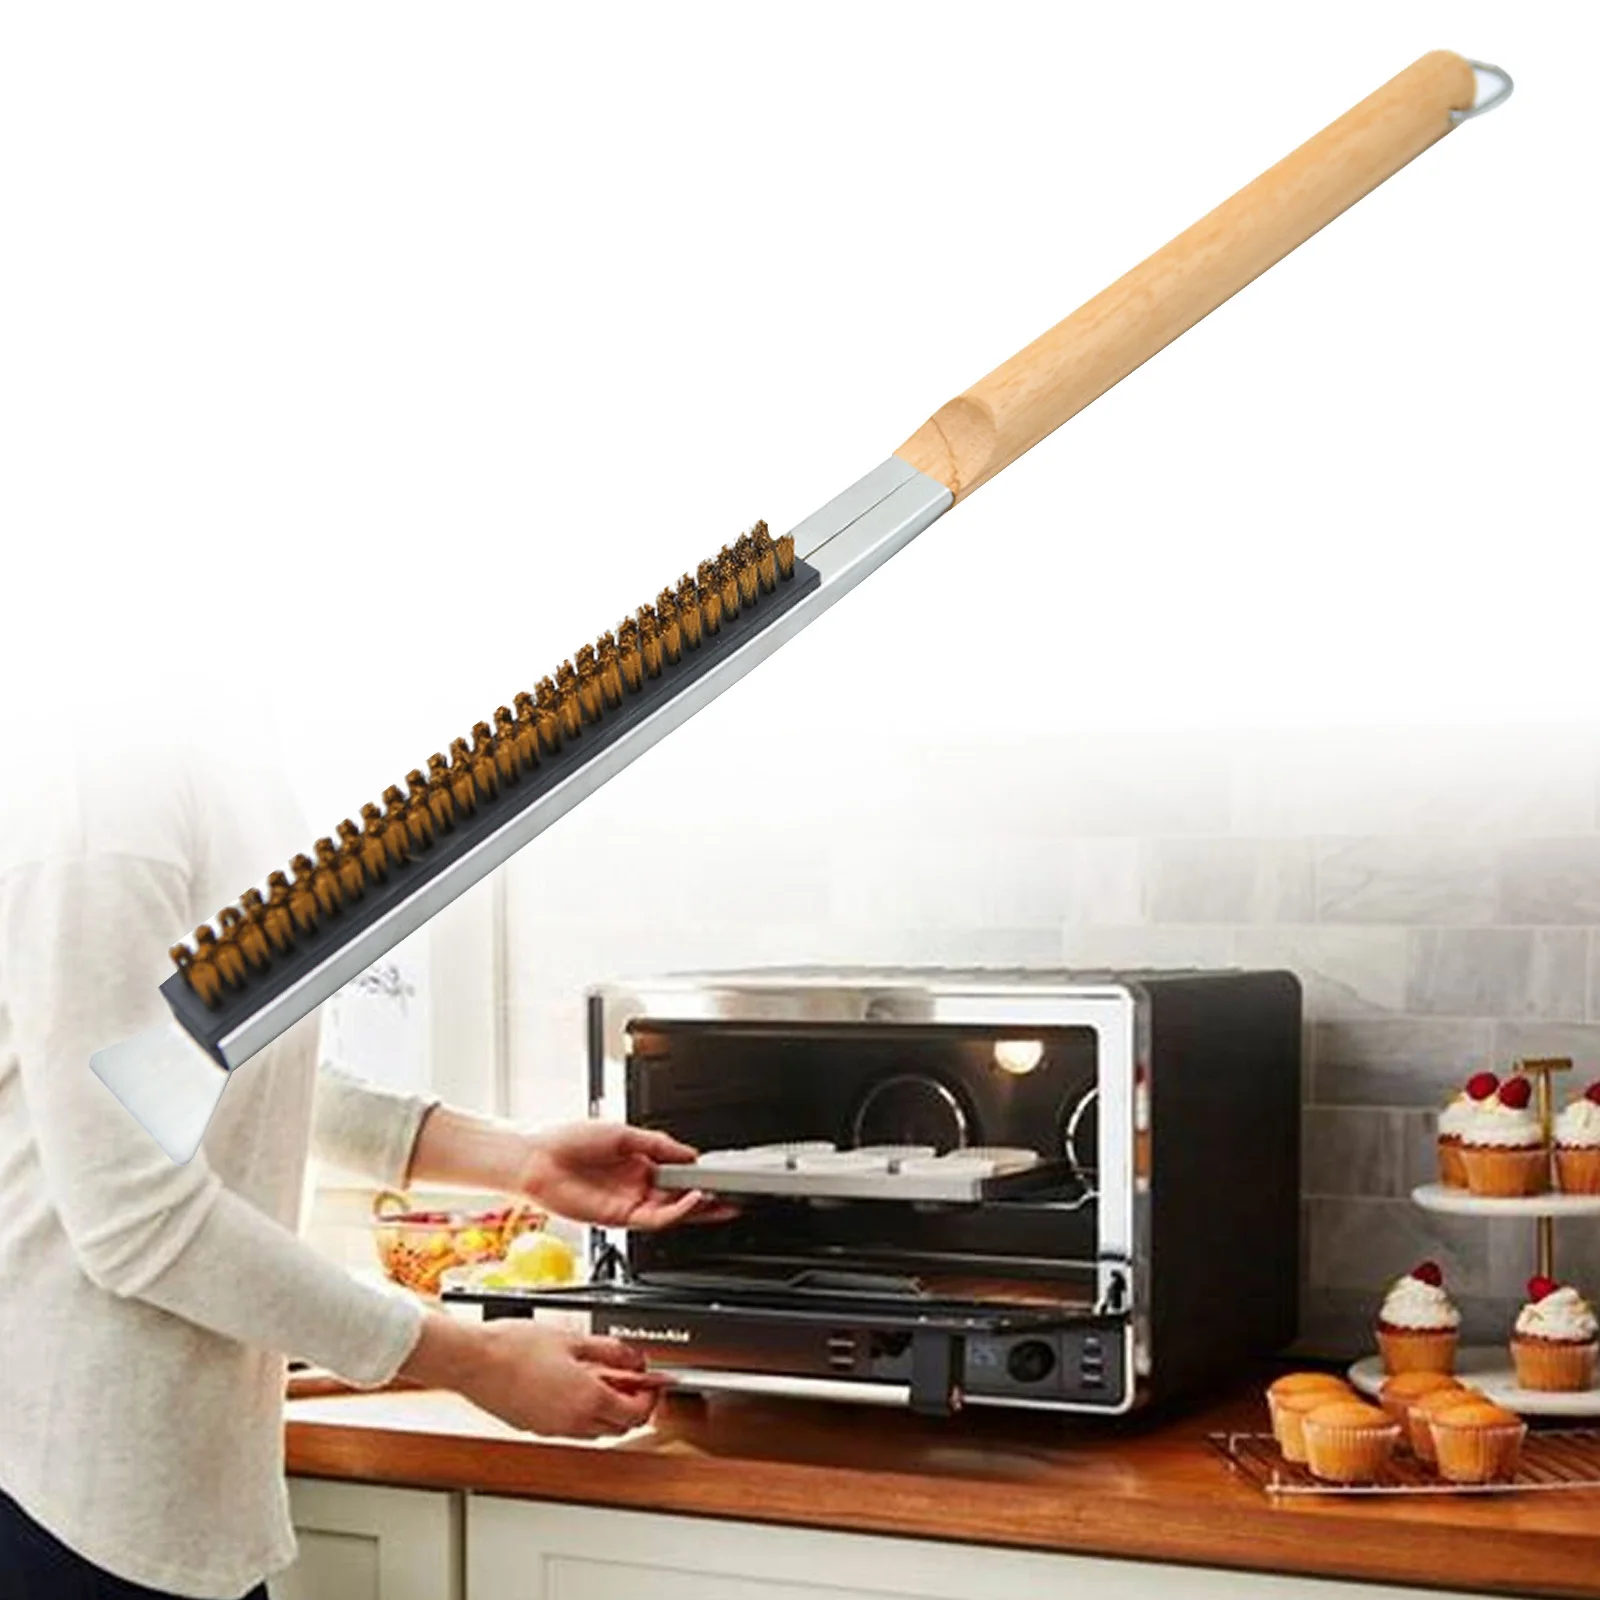 Pizza Stone Cleaning Brush Long Handle with Metal Scraper BBQ Oven Grill Brush for Pizza Oven Cooking BBQ Restaurant Baking